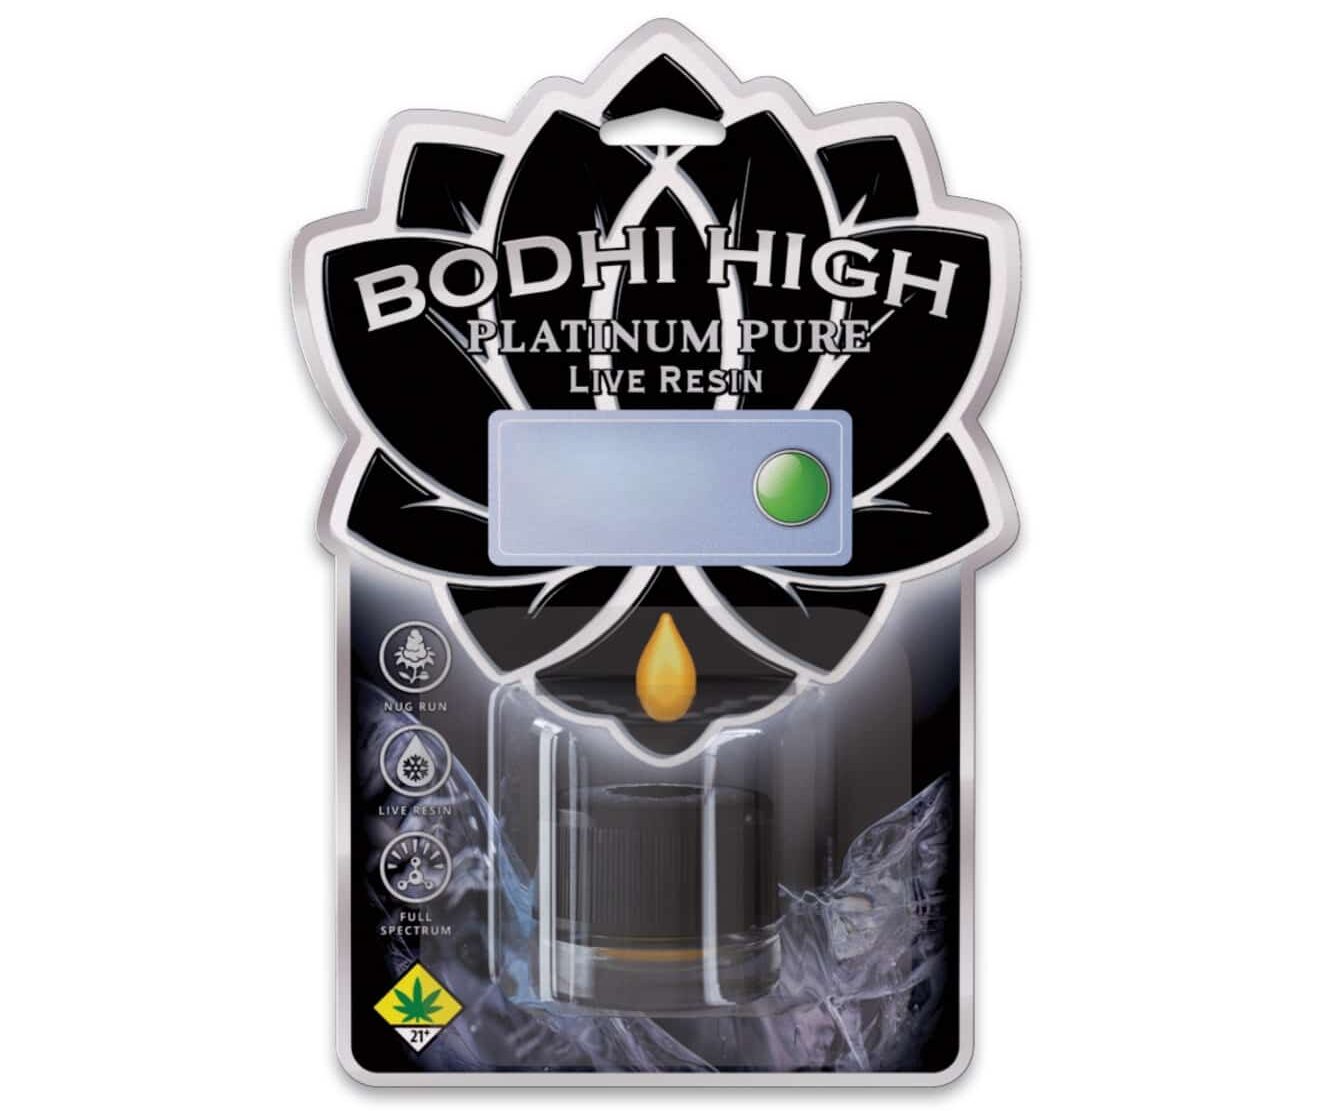 Bodhi High Platinum Pure Live Resin Dab Cannabis Extract Concentrate